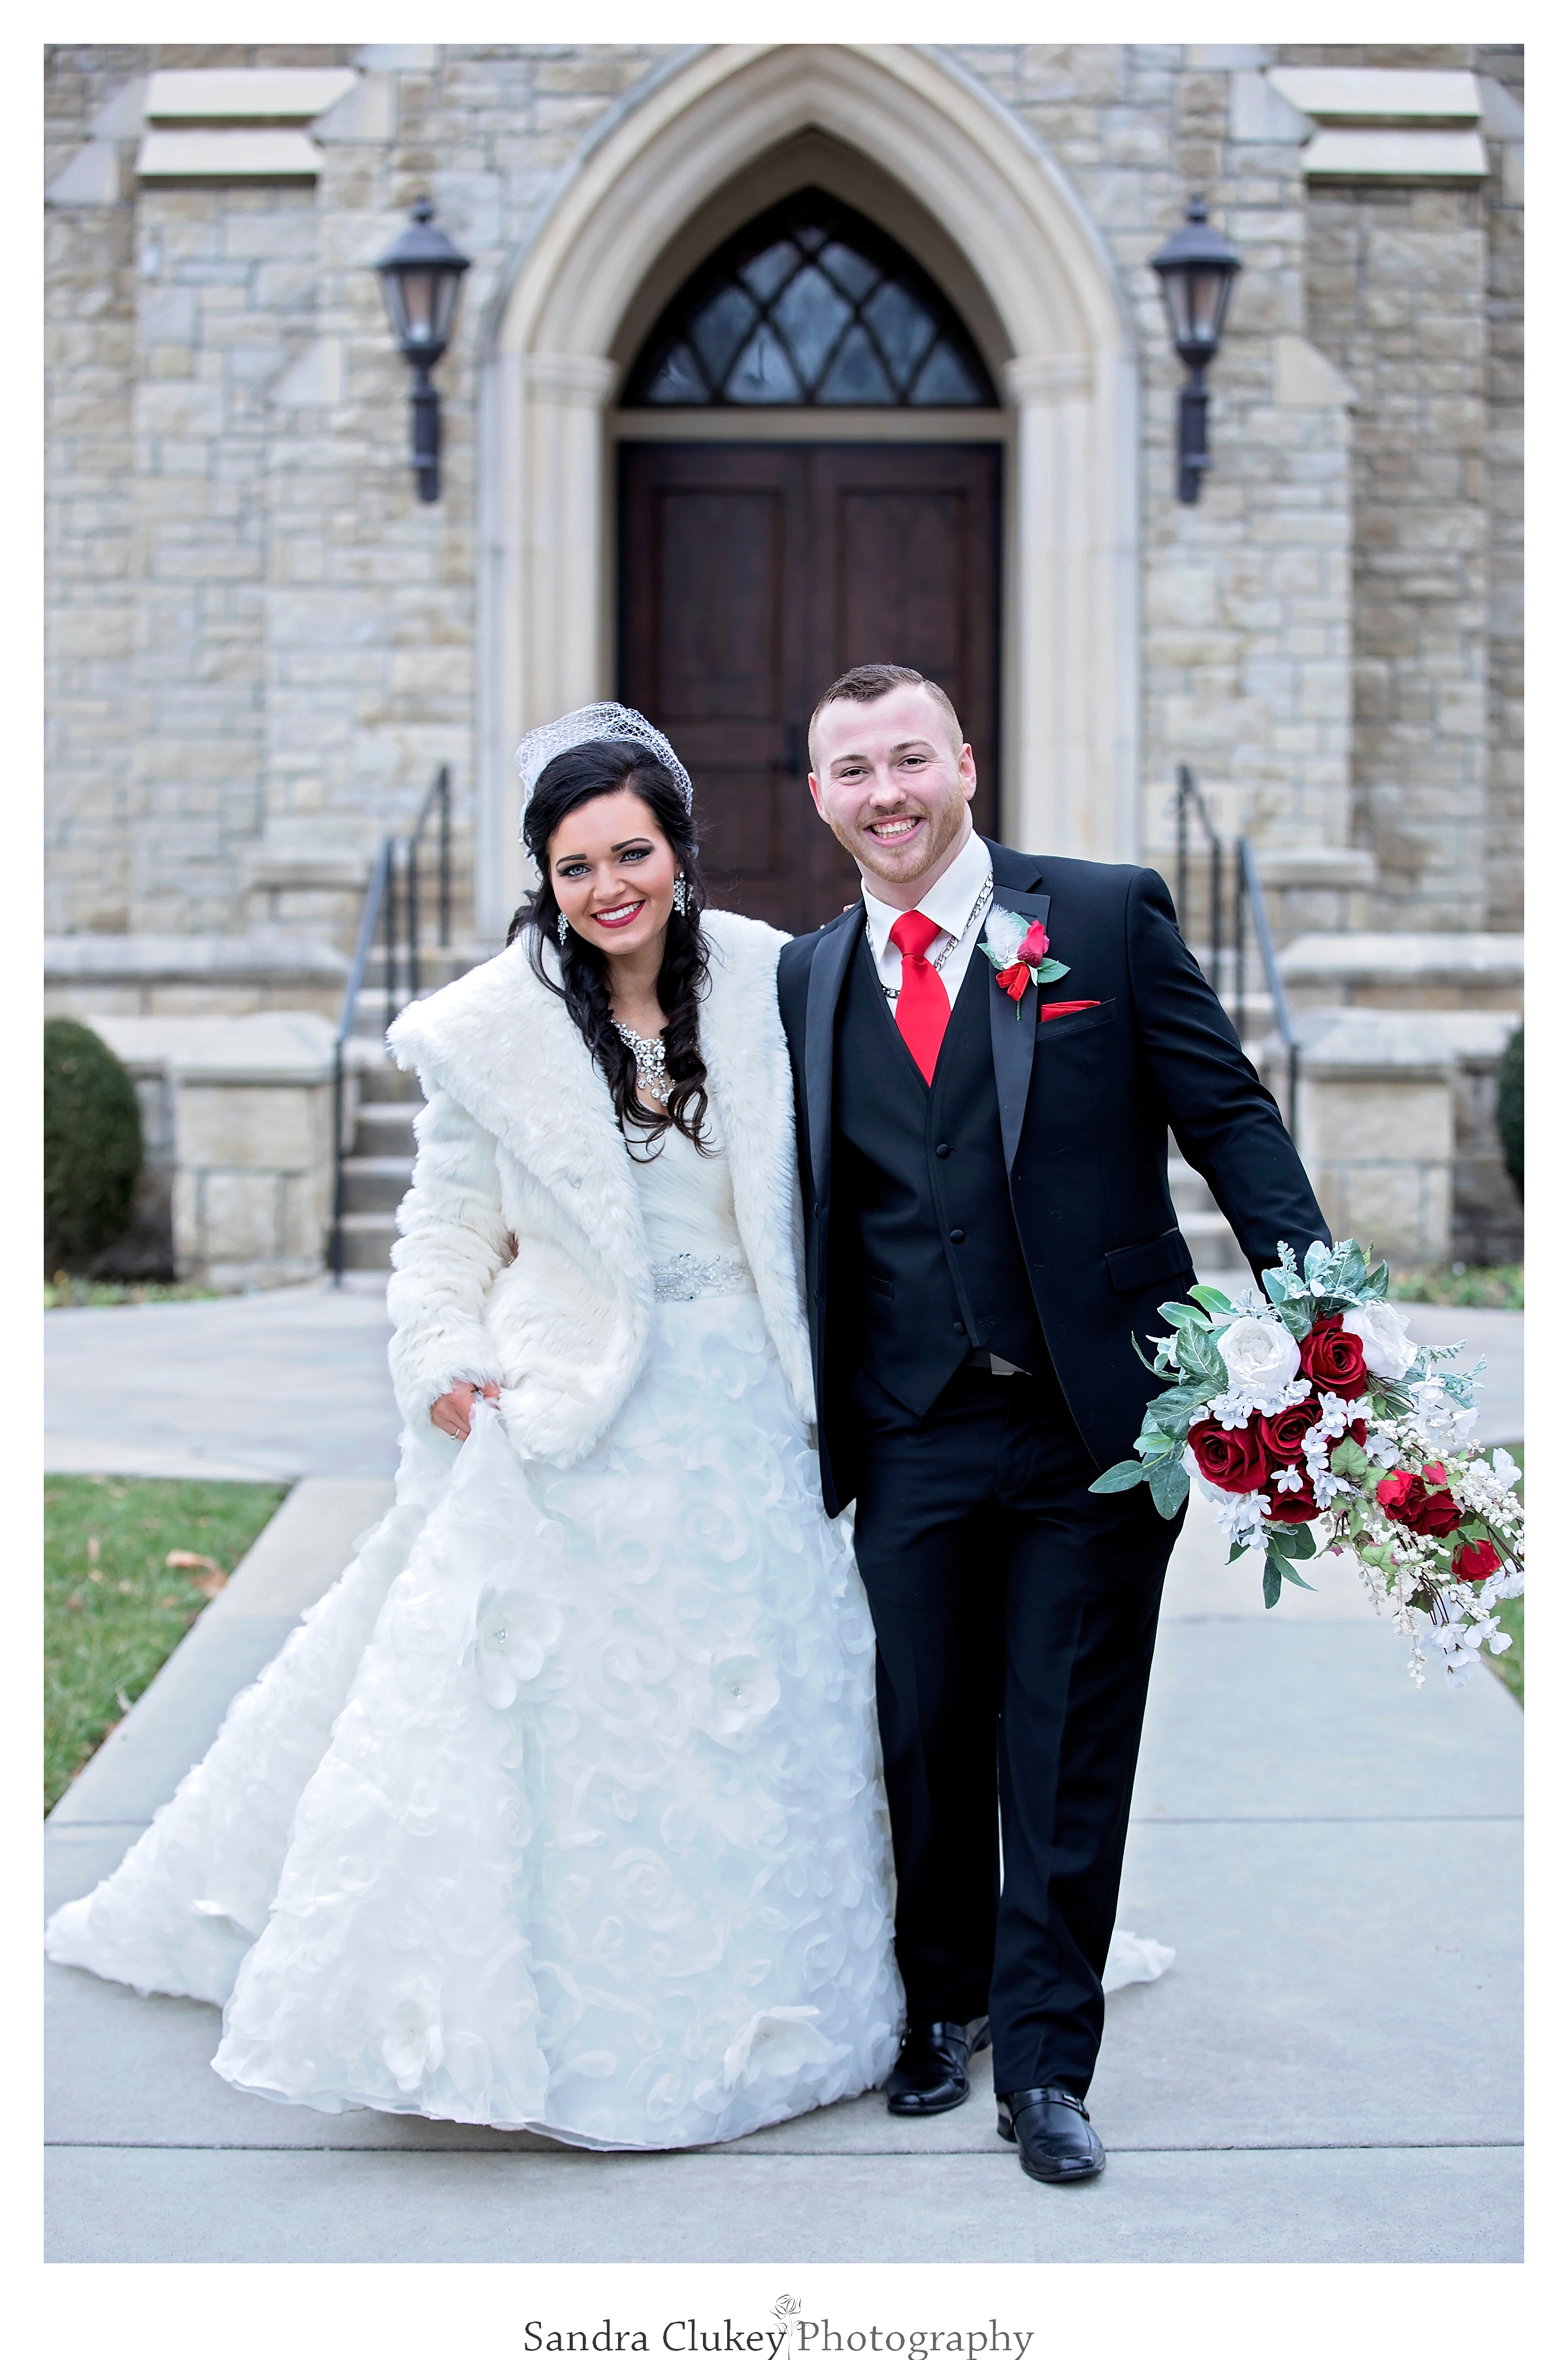 Lovely bride and groom on wedding day in front of  Lee University chapel, Cleveland TN.